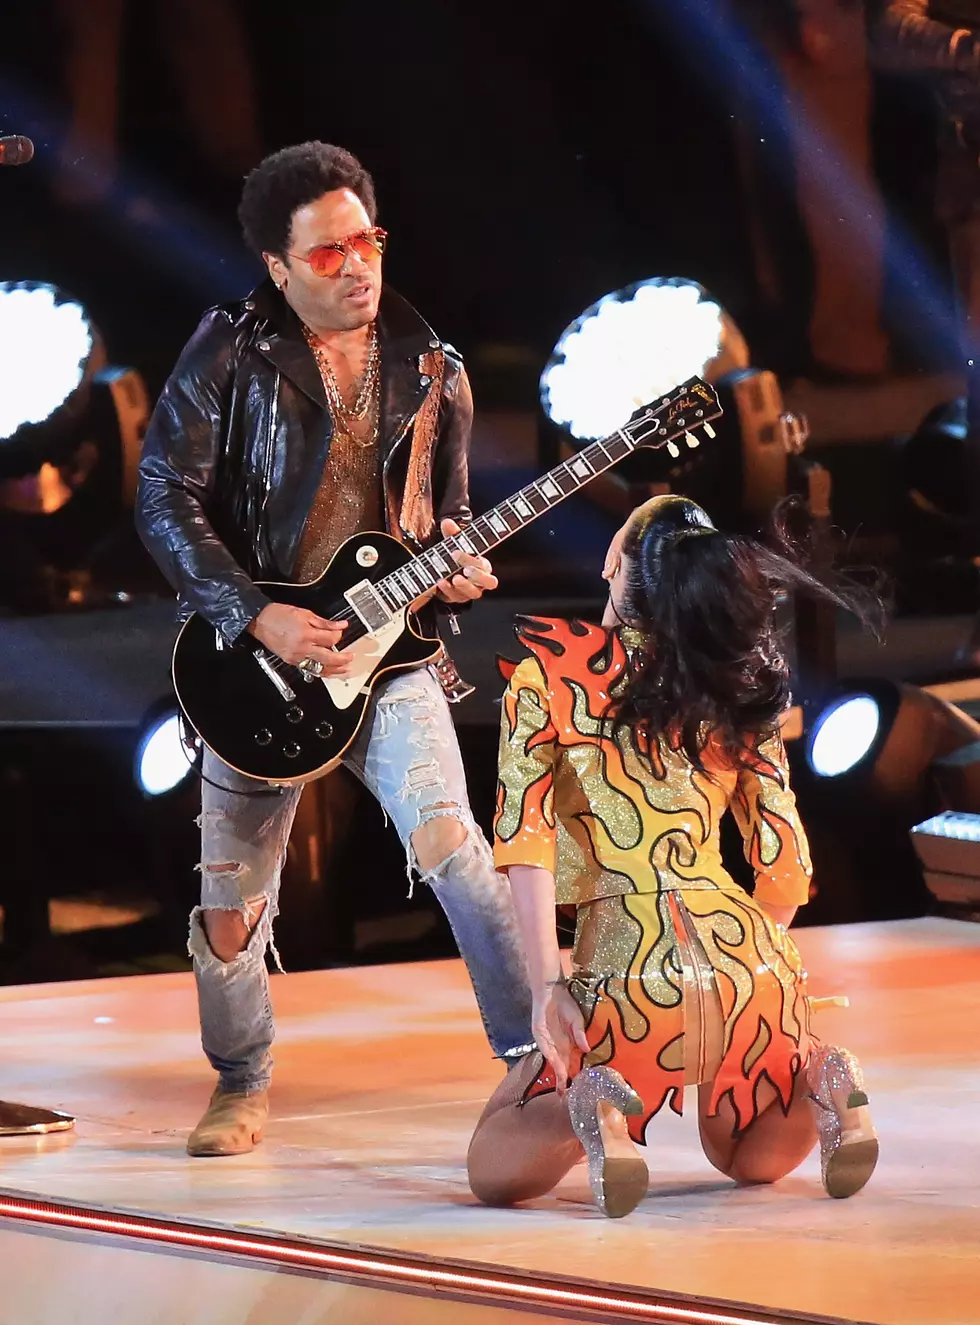 Lenny Kravitz' Penis Hulked Out of His Pants During a Guitar Solo!